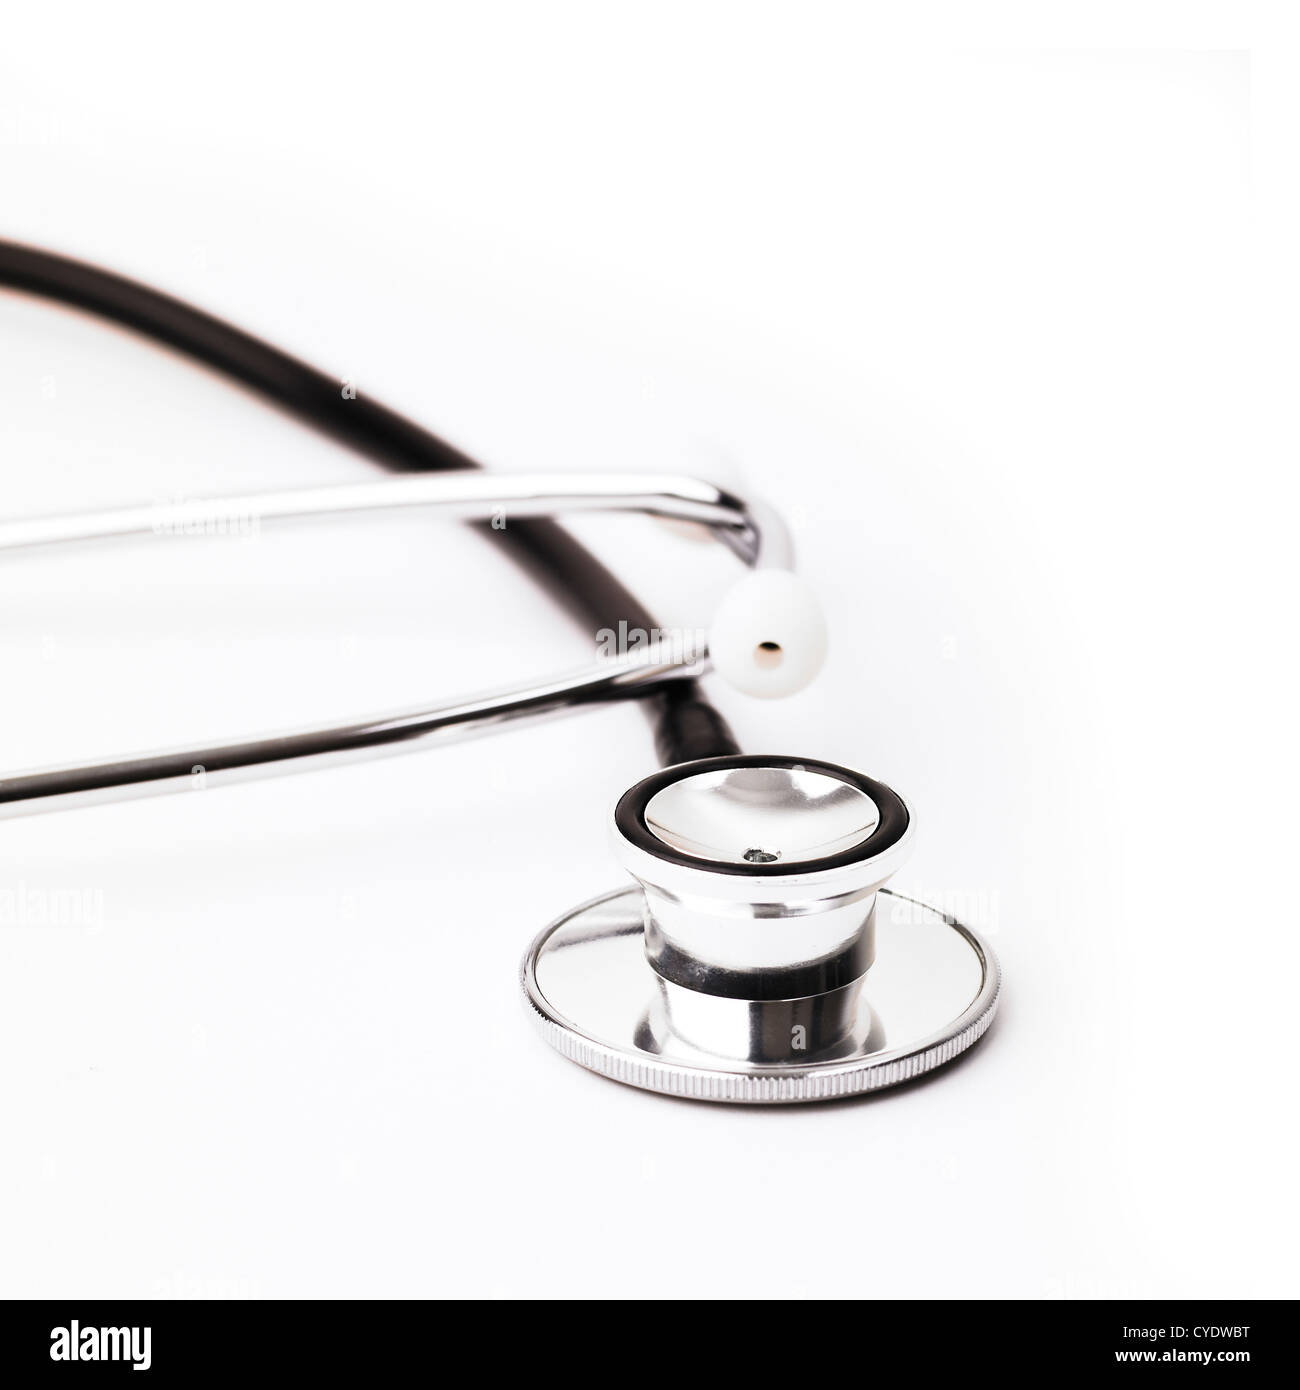 Stethoscope Wallpapers - Wallpaper Cave